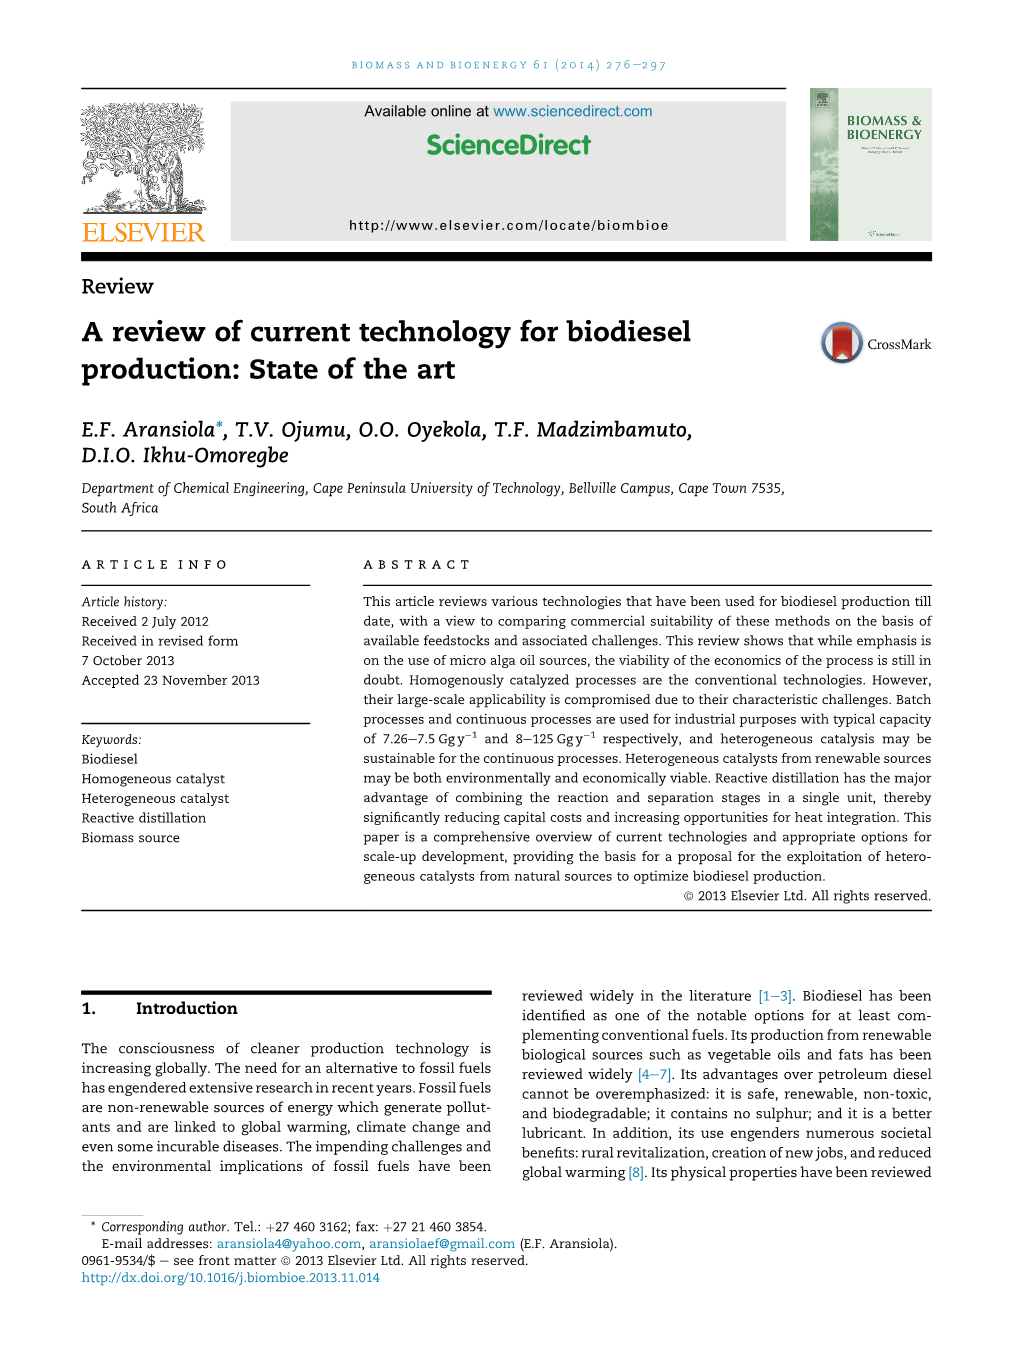 A Review of Current Technology for Biodiesel Production: State of the Art